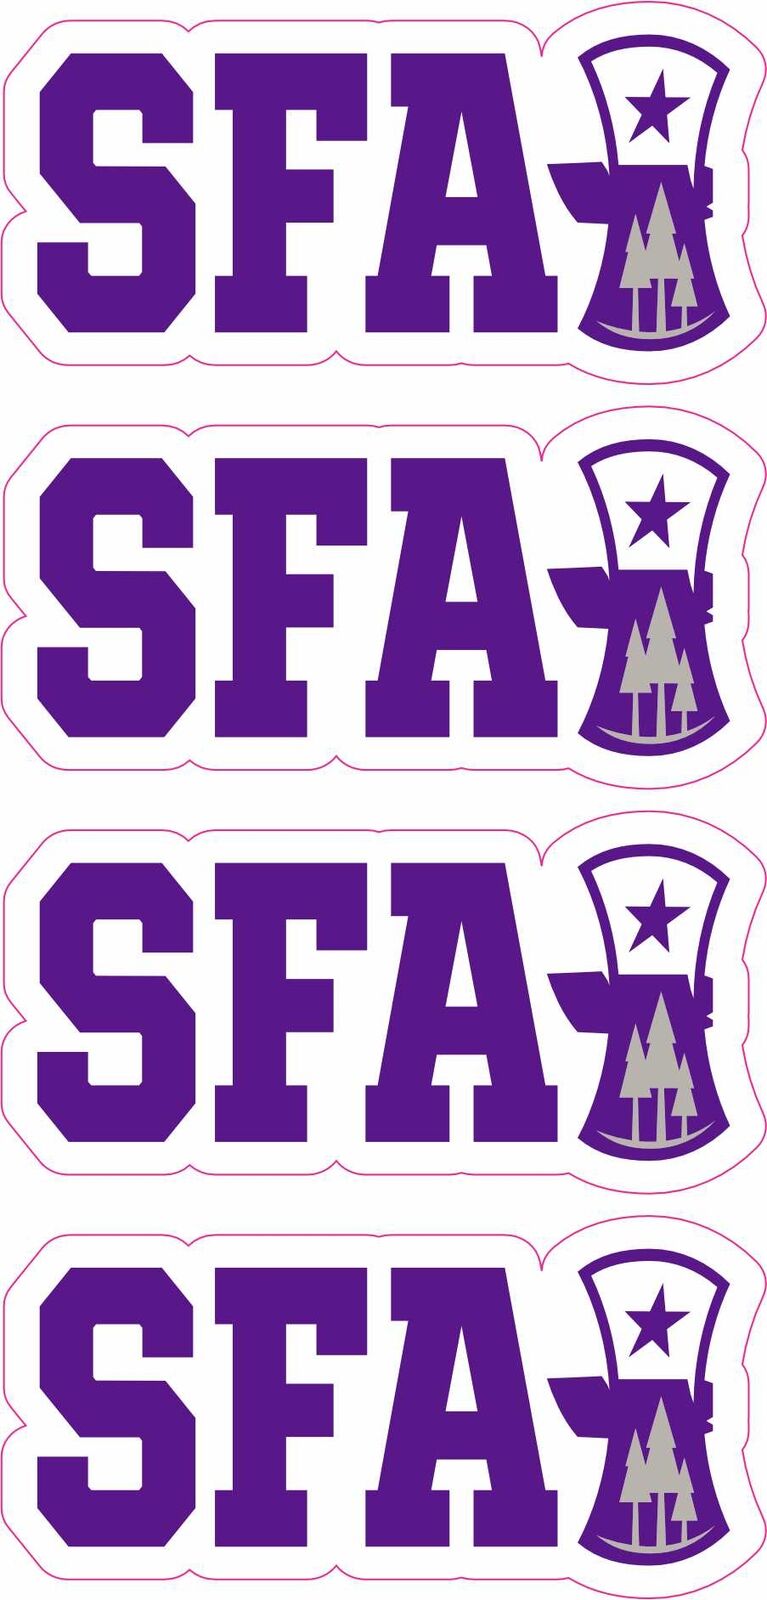 StickerTalk Officially Licensed SFA Stickers, 3 inches x 1.25 inches